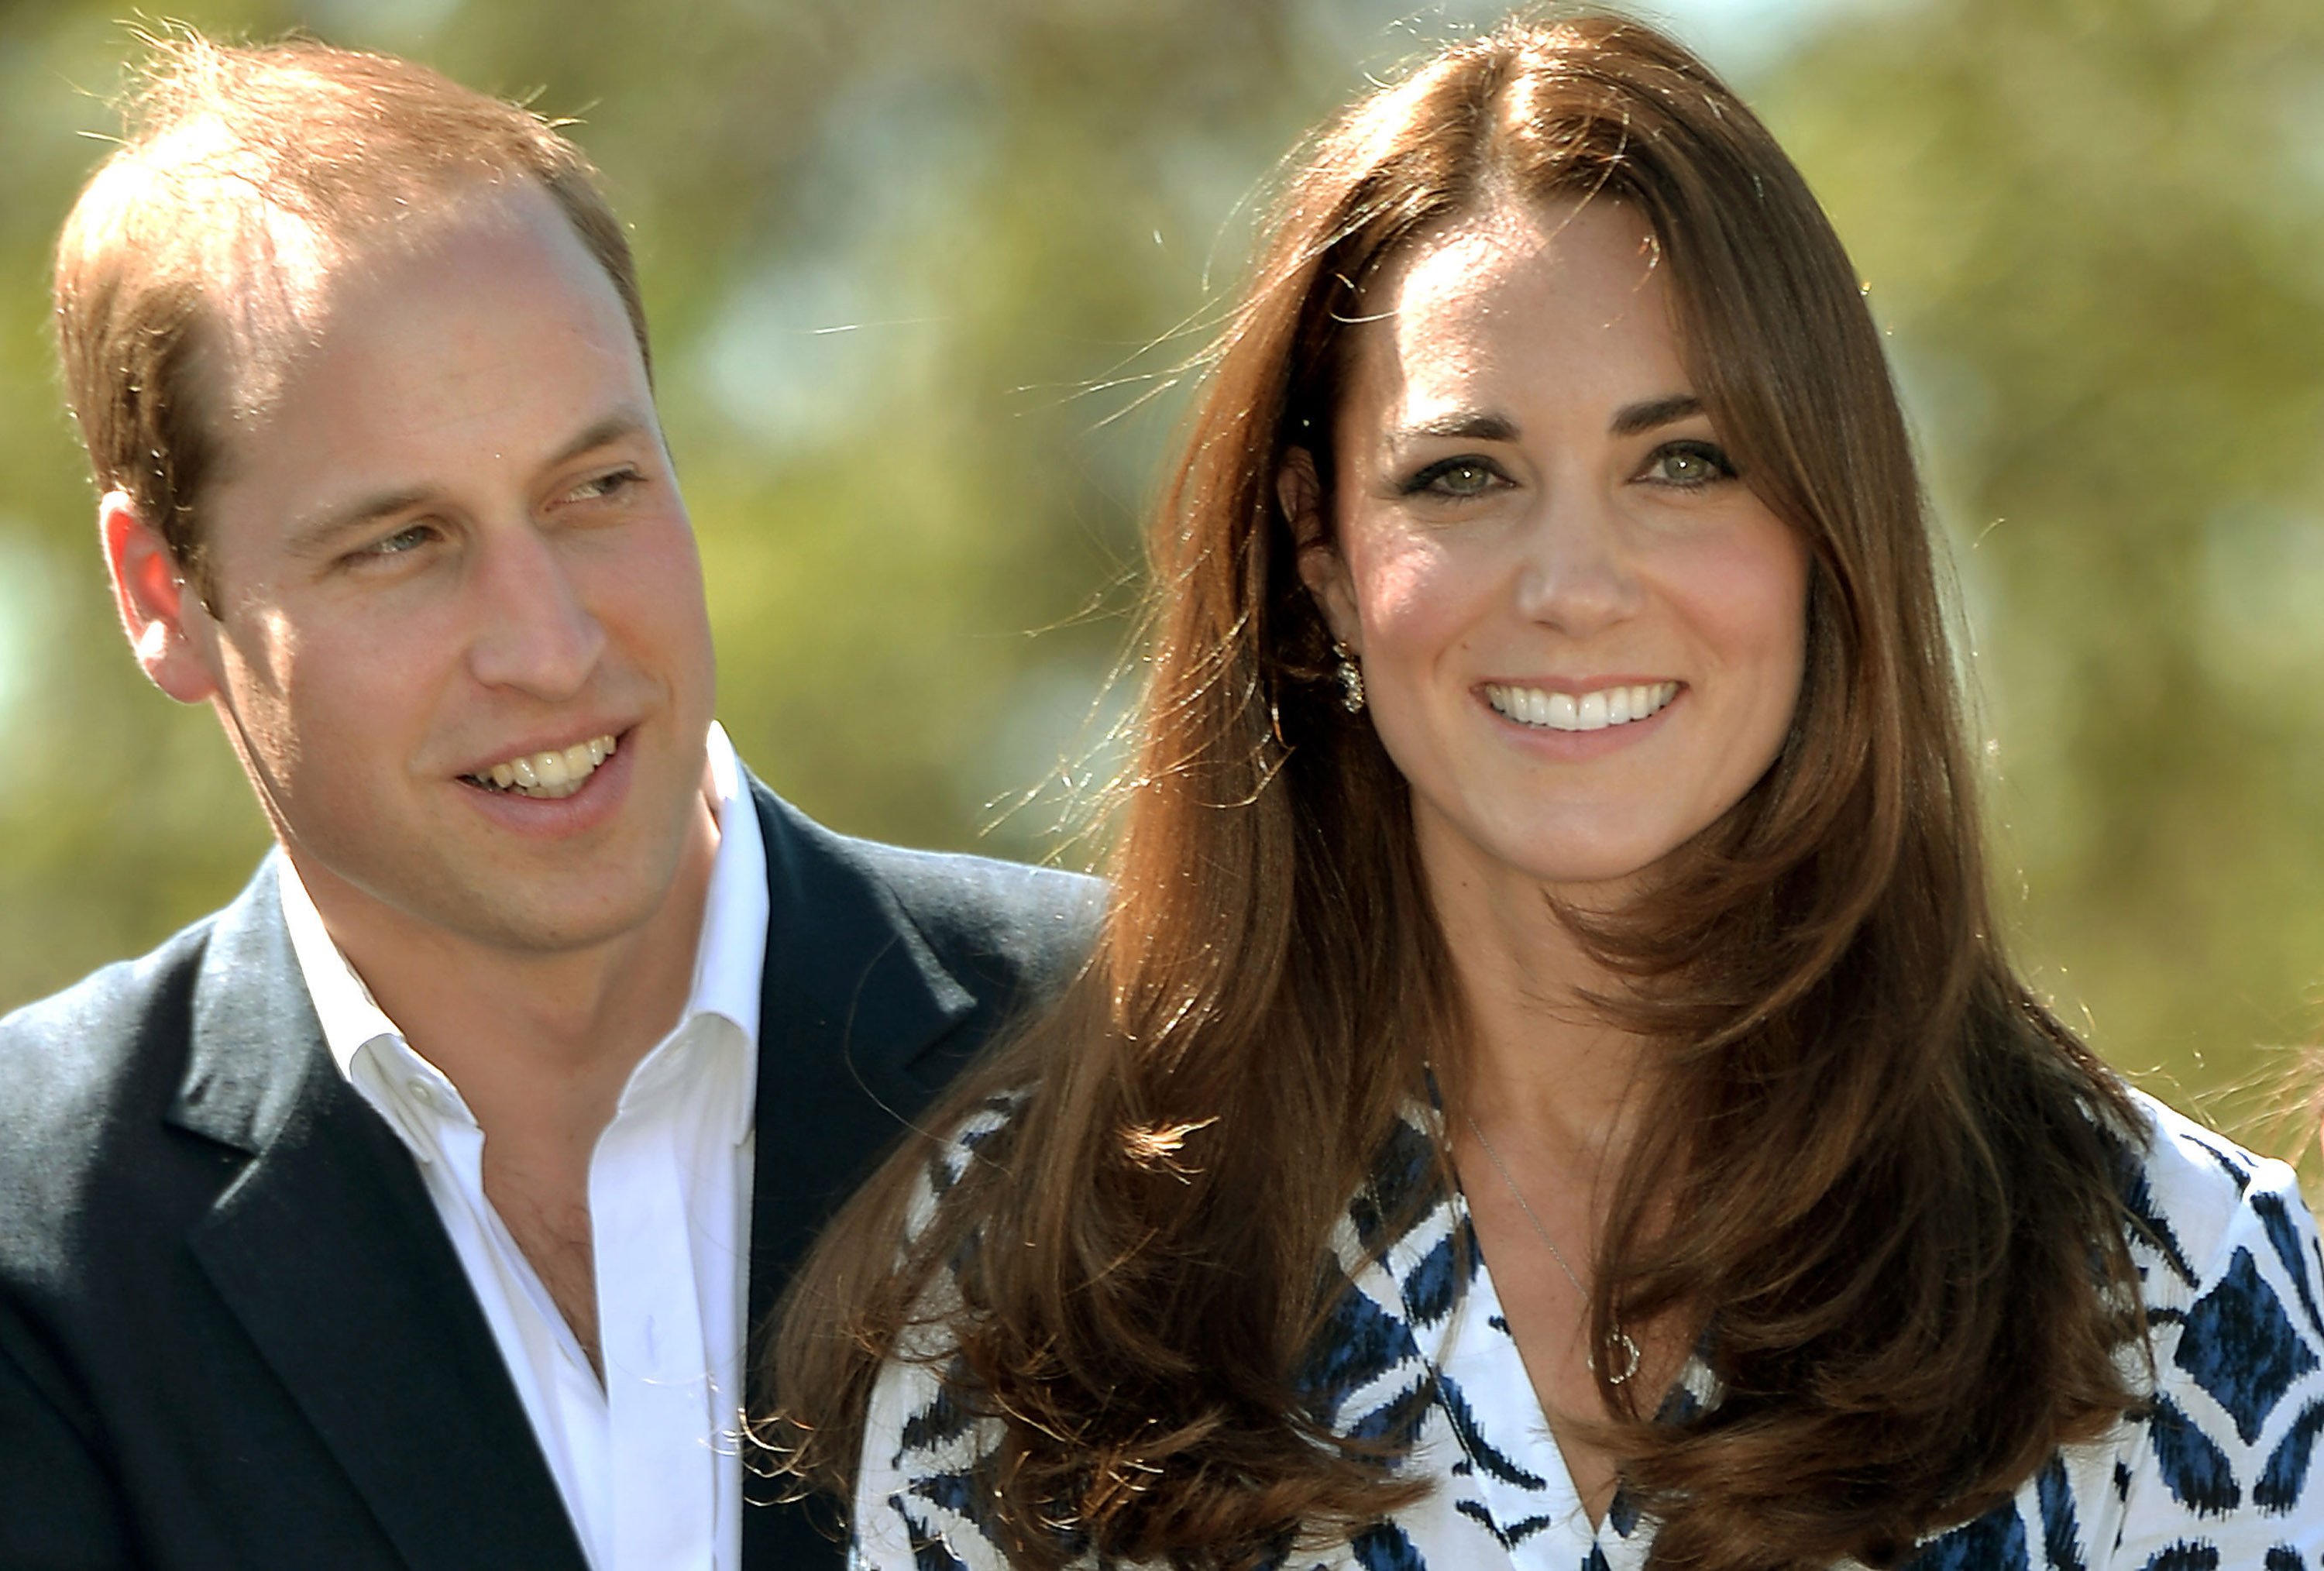 Prince William and Kate Middleton smile during an event. Kate and William are said to have 'Harry Potter scars' on their heads.